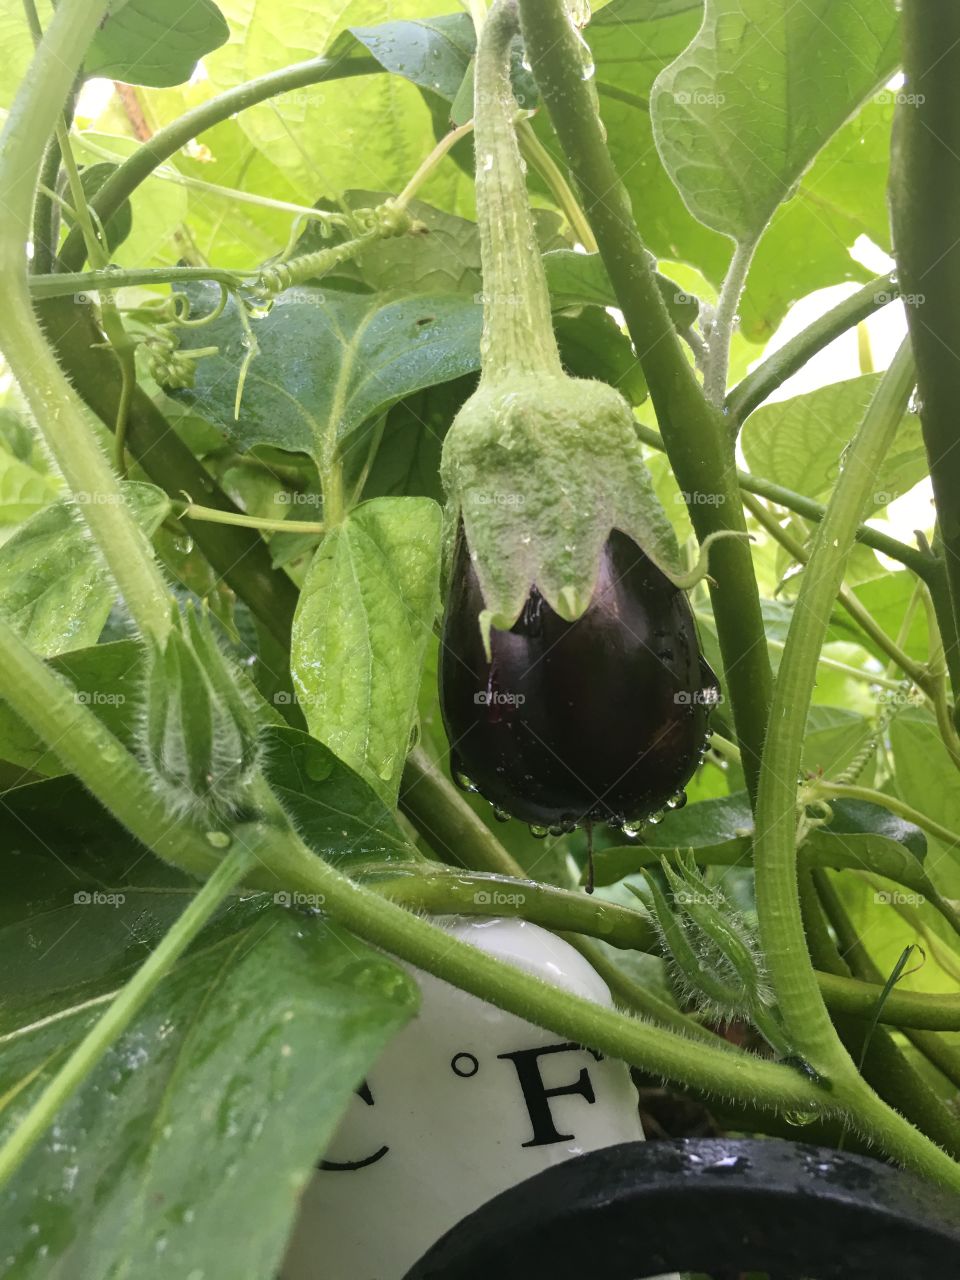 A baby eggplant beautiful purple fresh organic delicious almost ready for picking